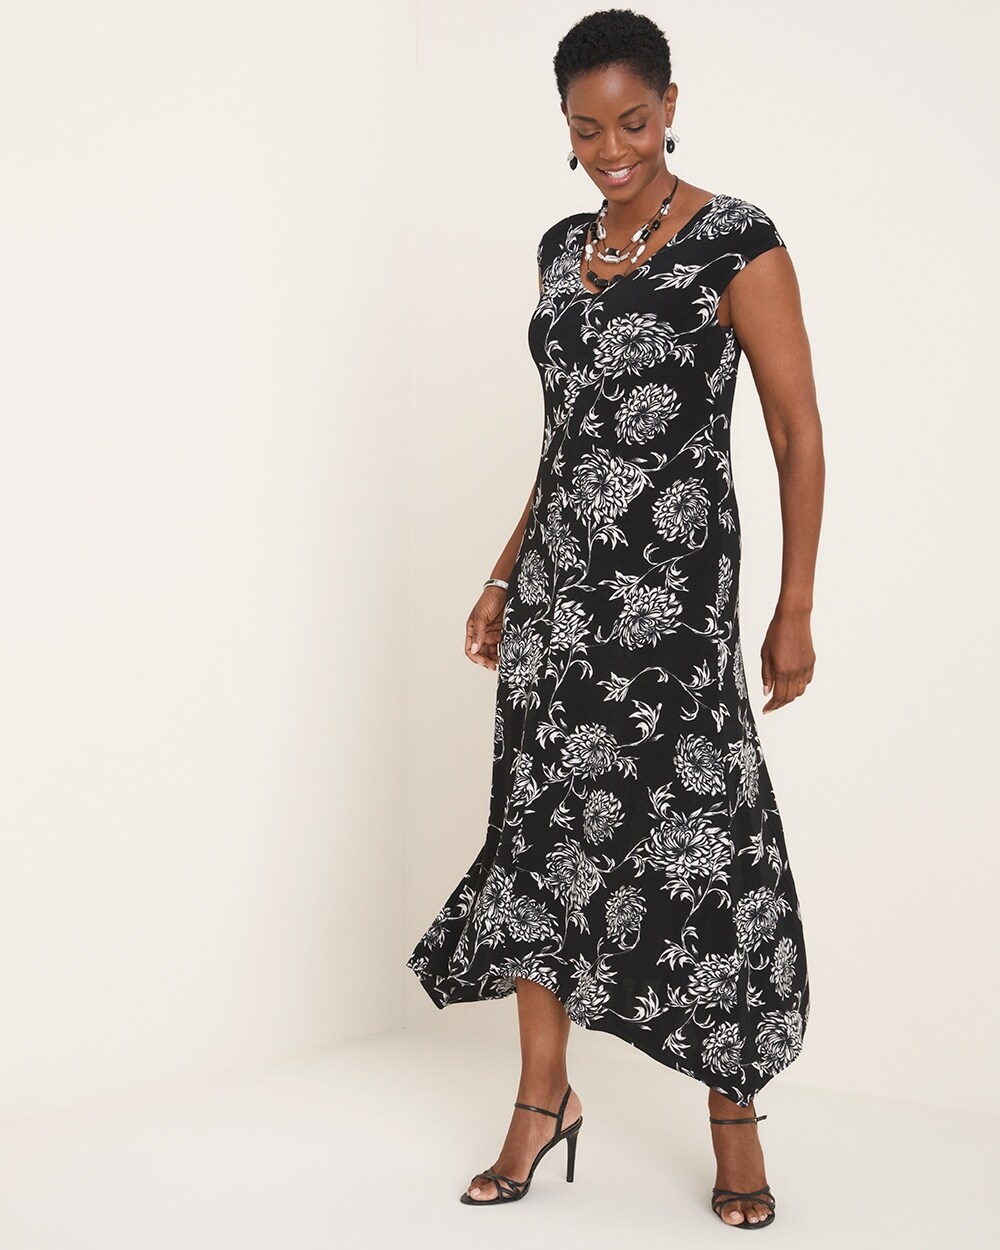 Travelers Classic Black and White Floral Dress